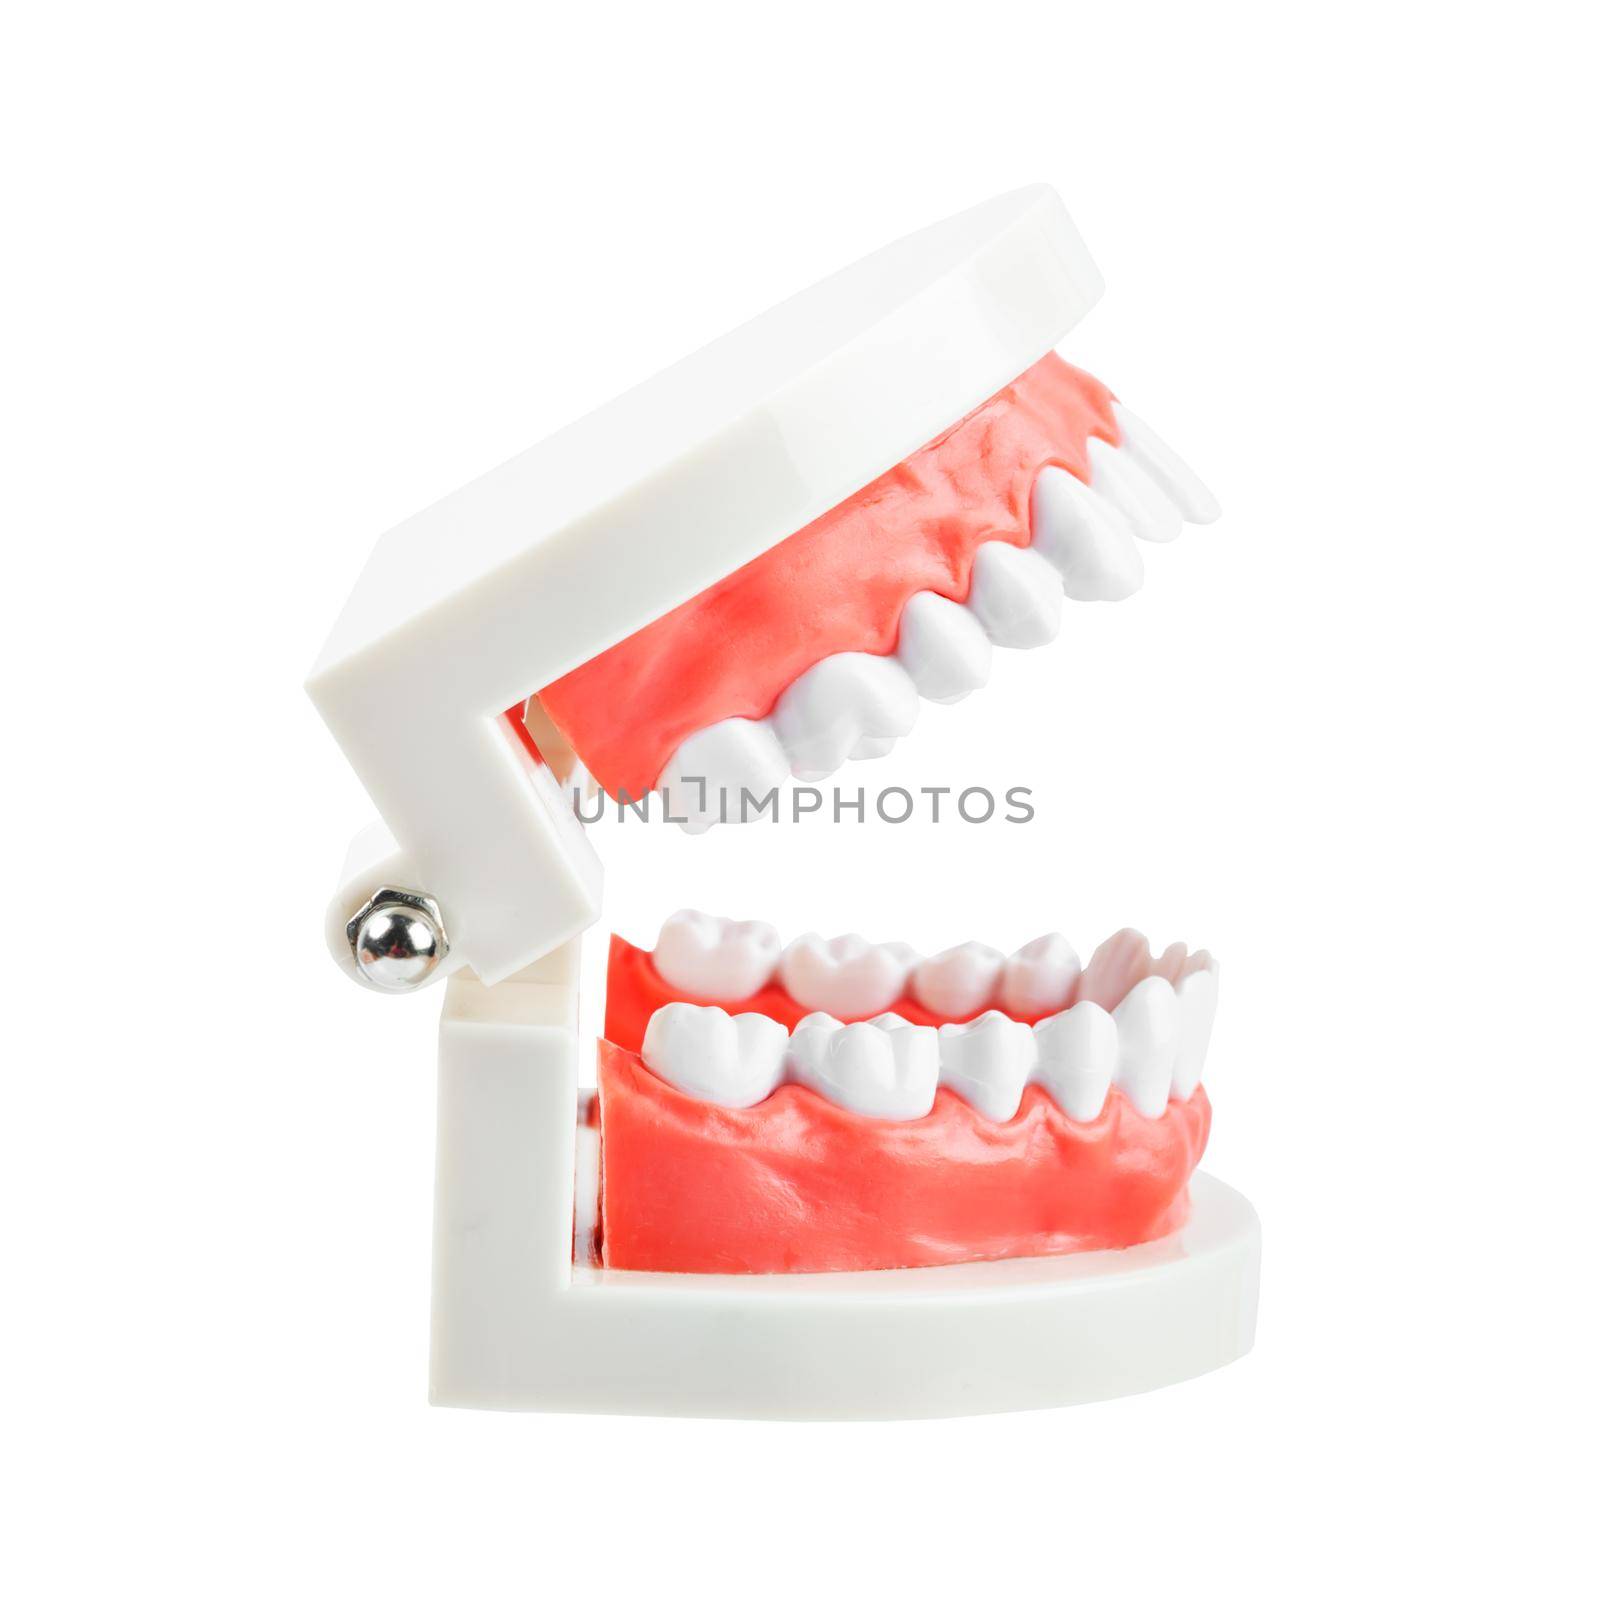 Teeth model isolated on white background. by Gamjai